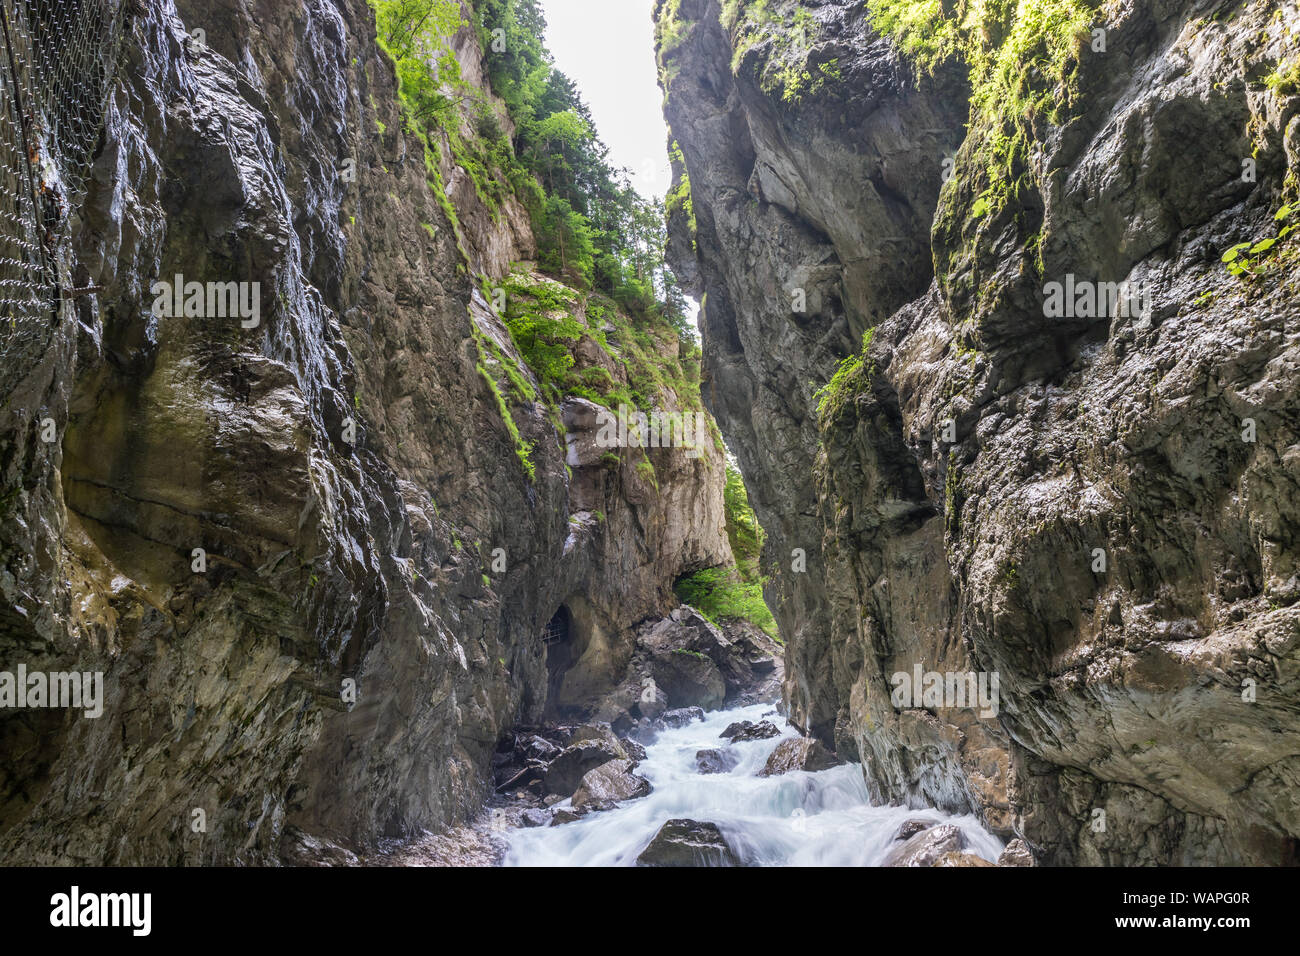 The fascinating touristic wildwater Partnach Gorge in Germany Stock Photo